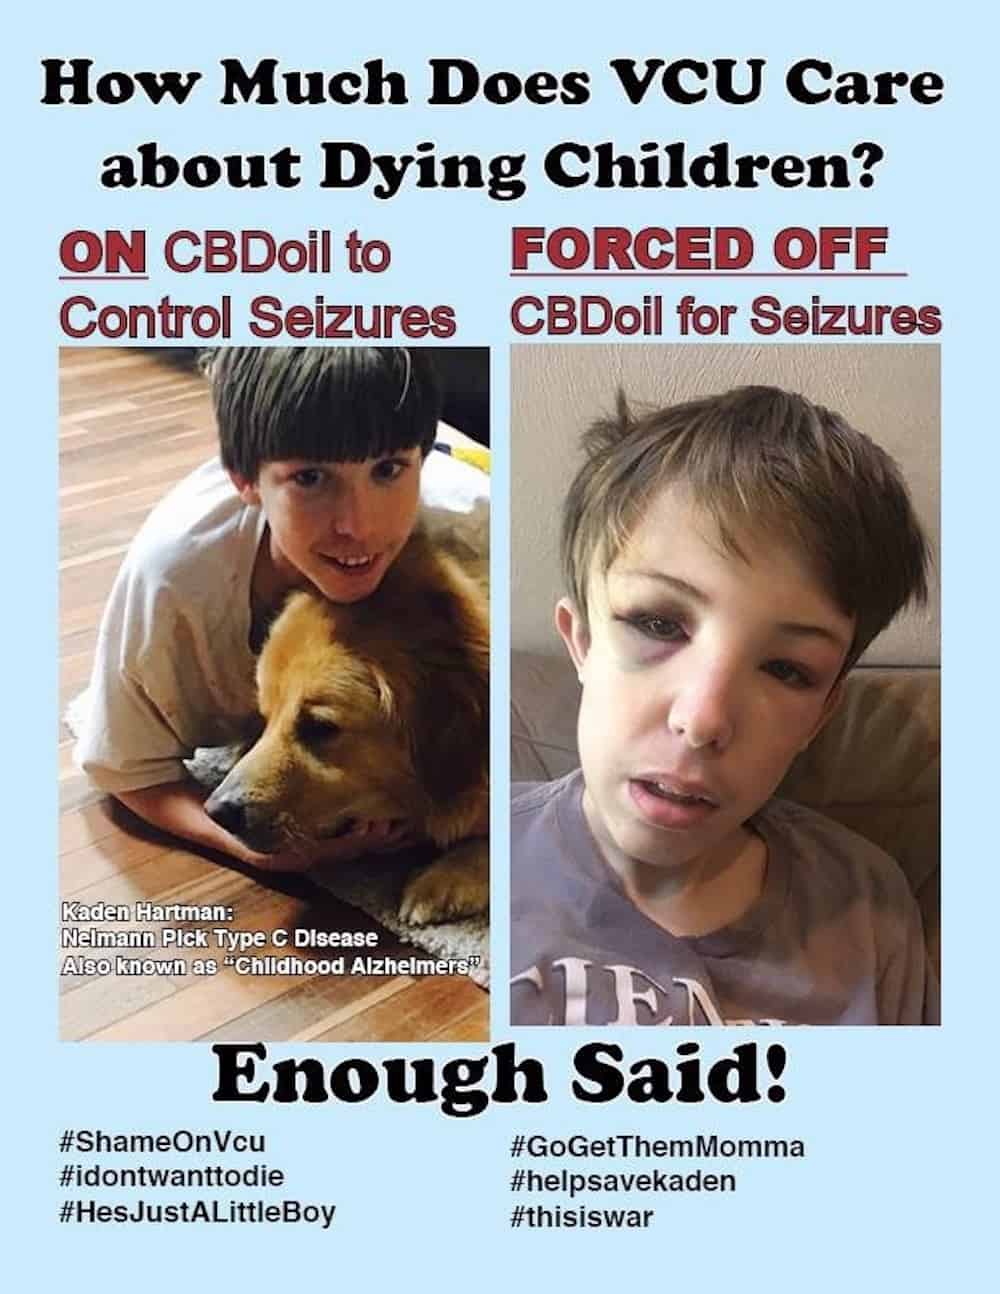 13-Year-Old Denied Life-Saving Treatment Because He Used CBD Oil